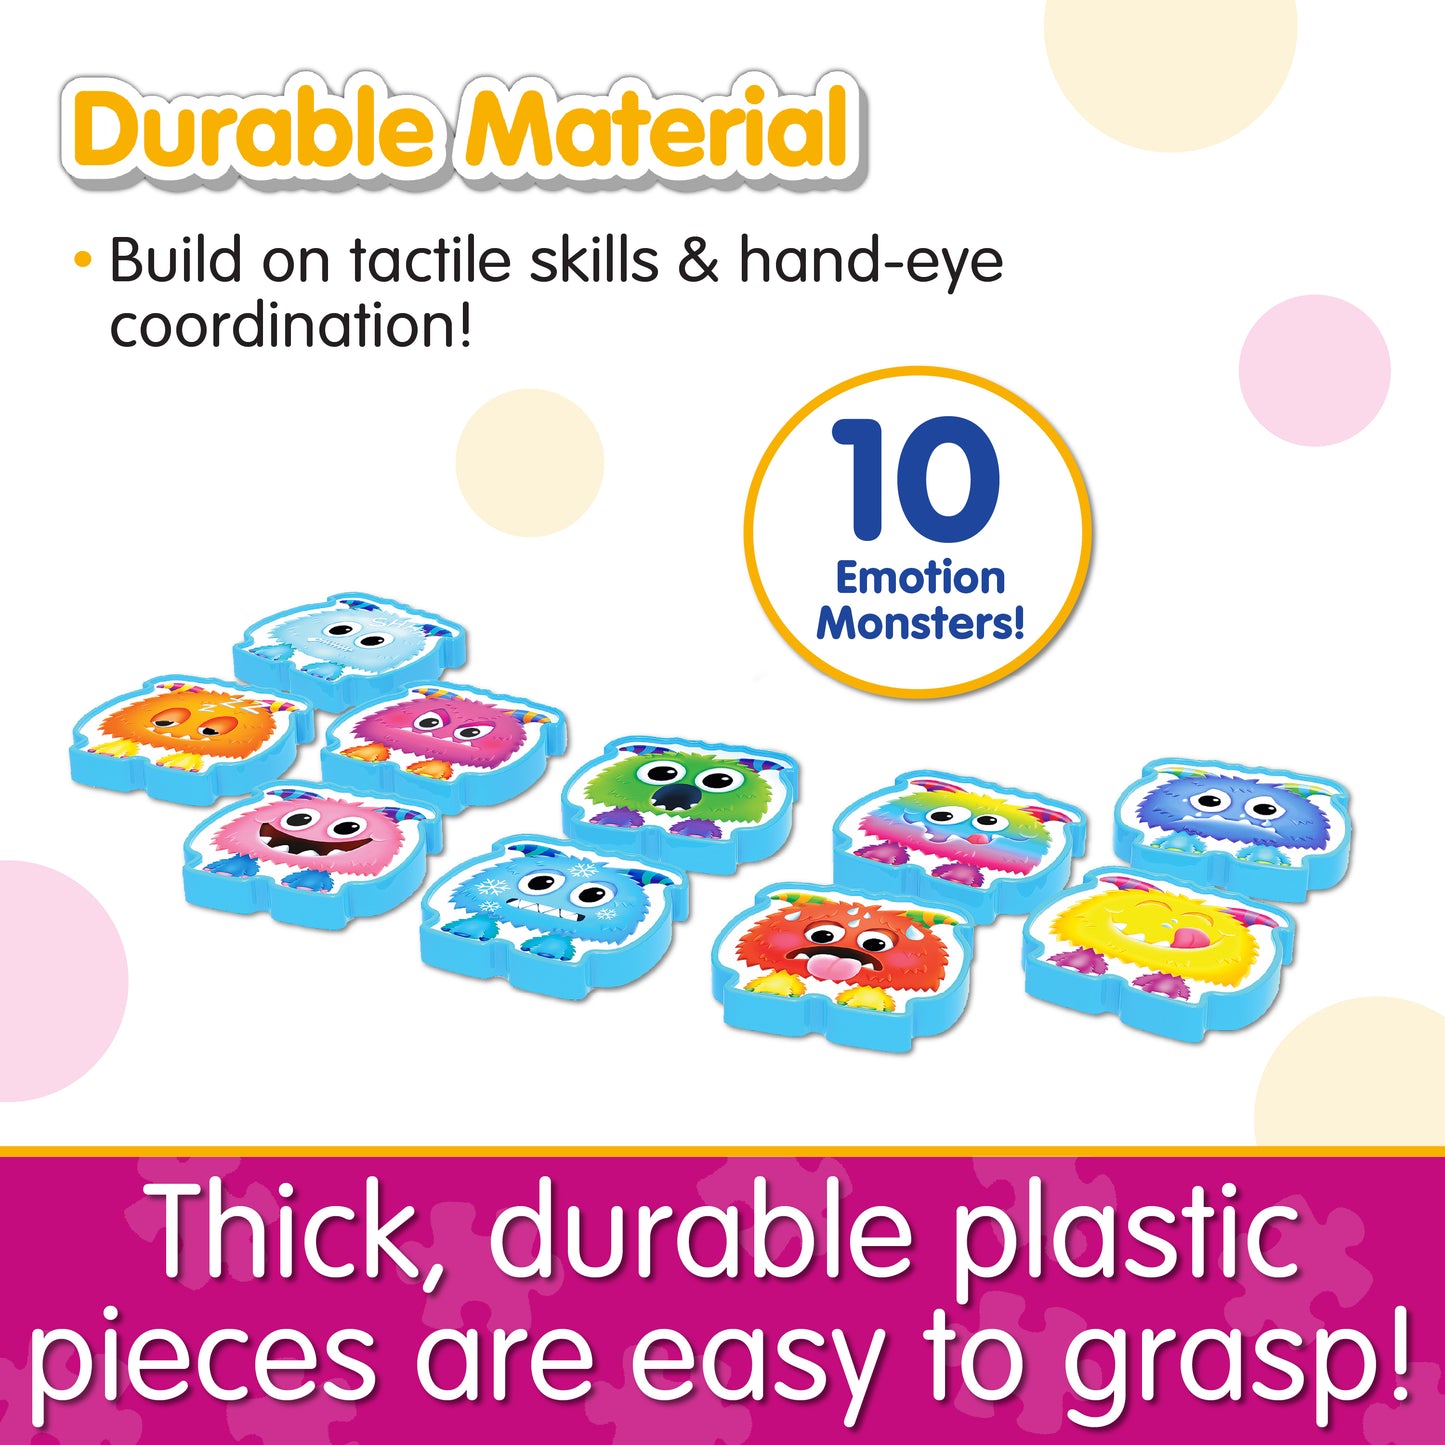 Infographic about Emoji Monster's features that says, "Thick, durable plastic pieces are easy to grasp!"